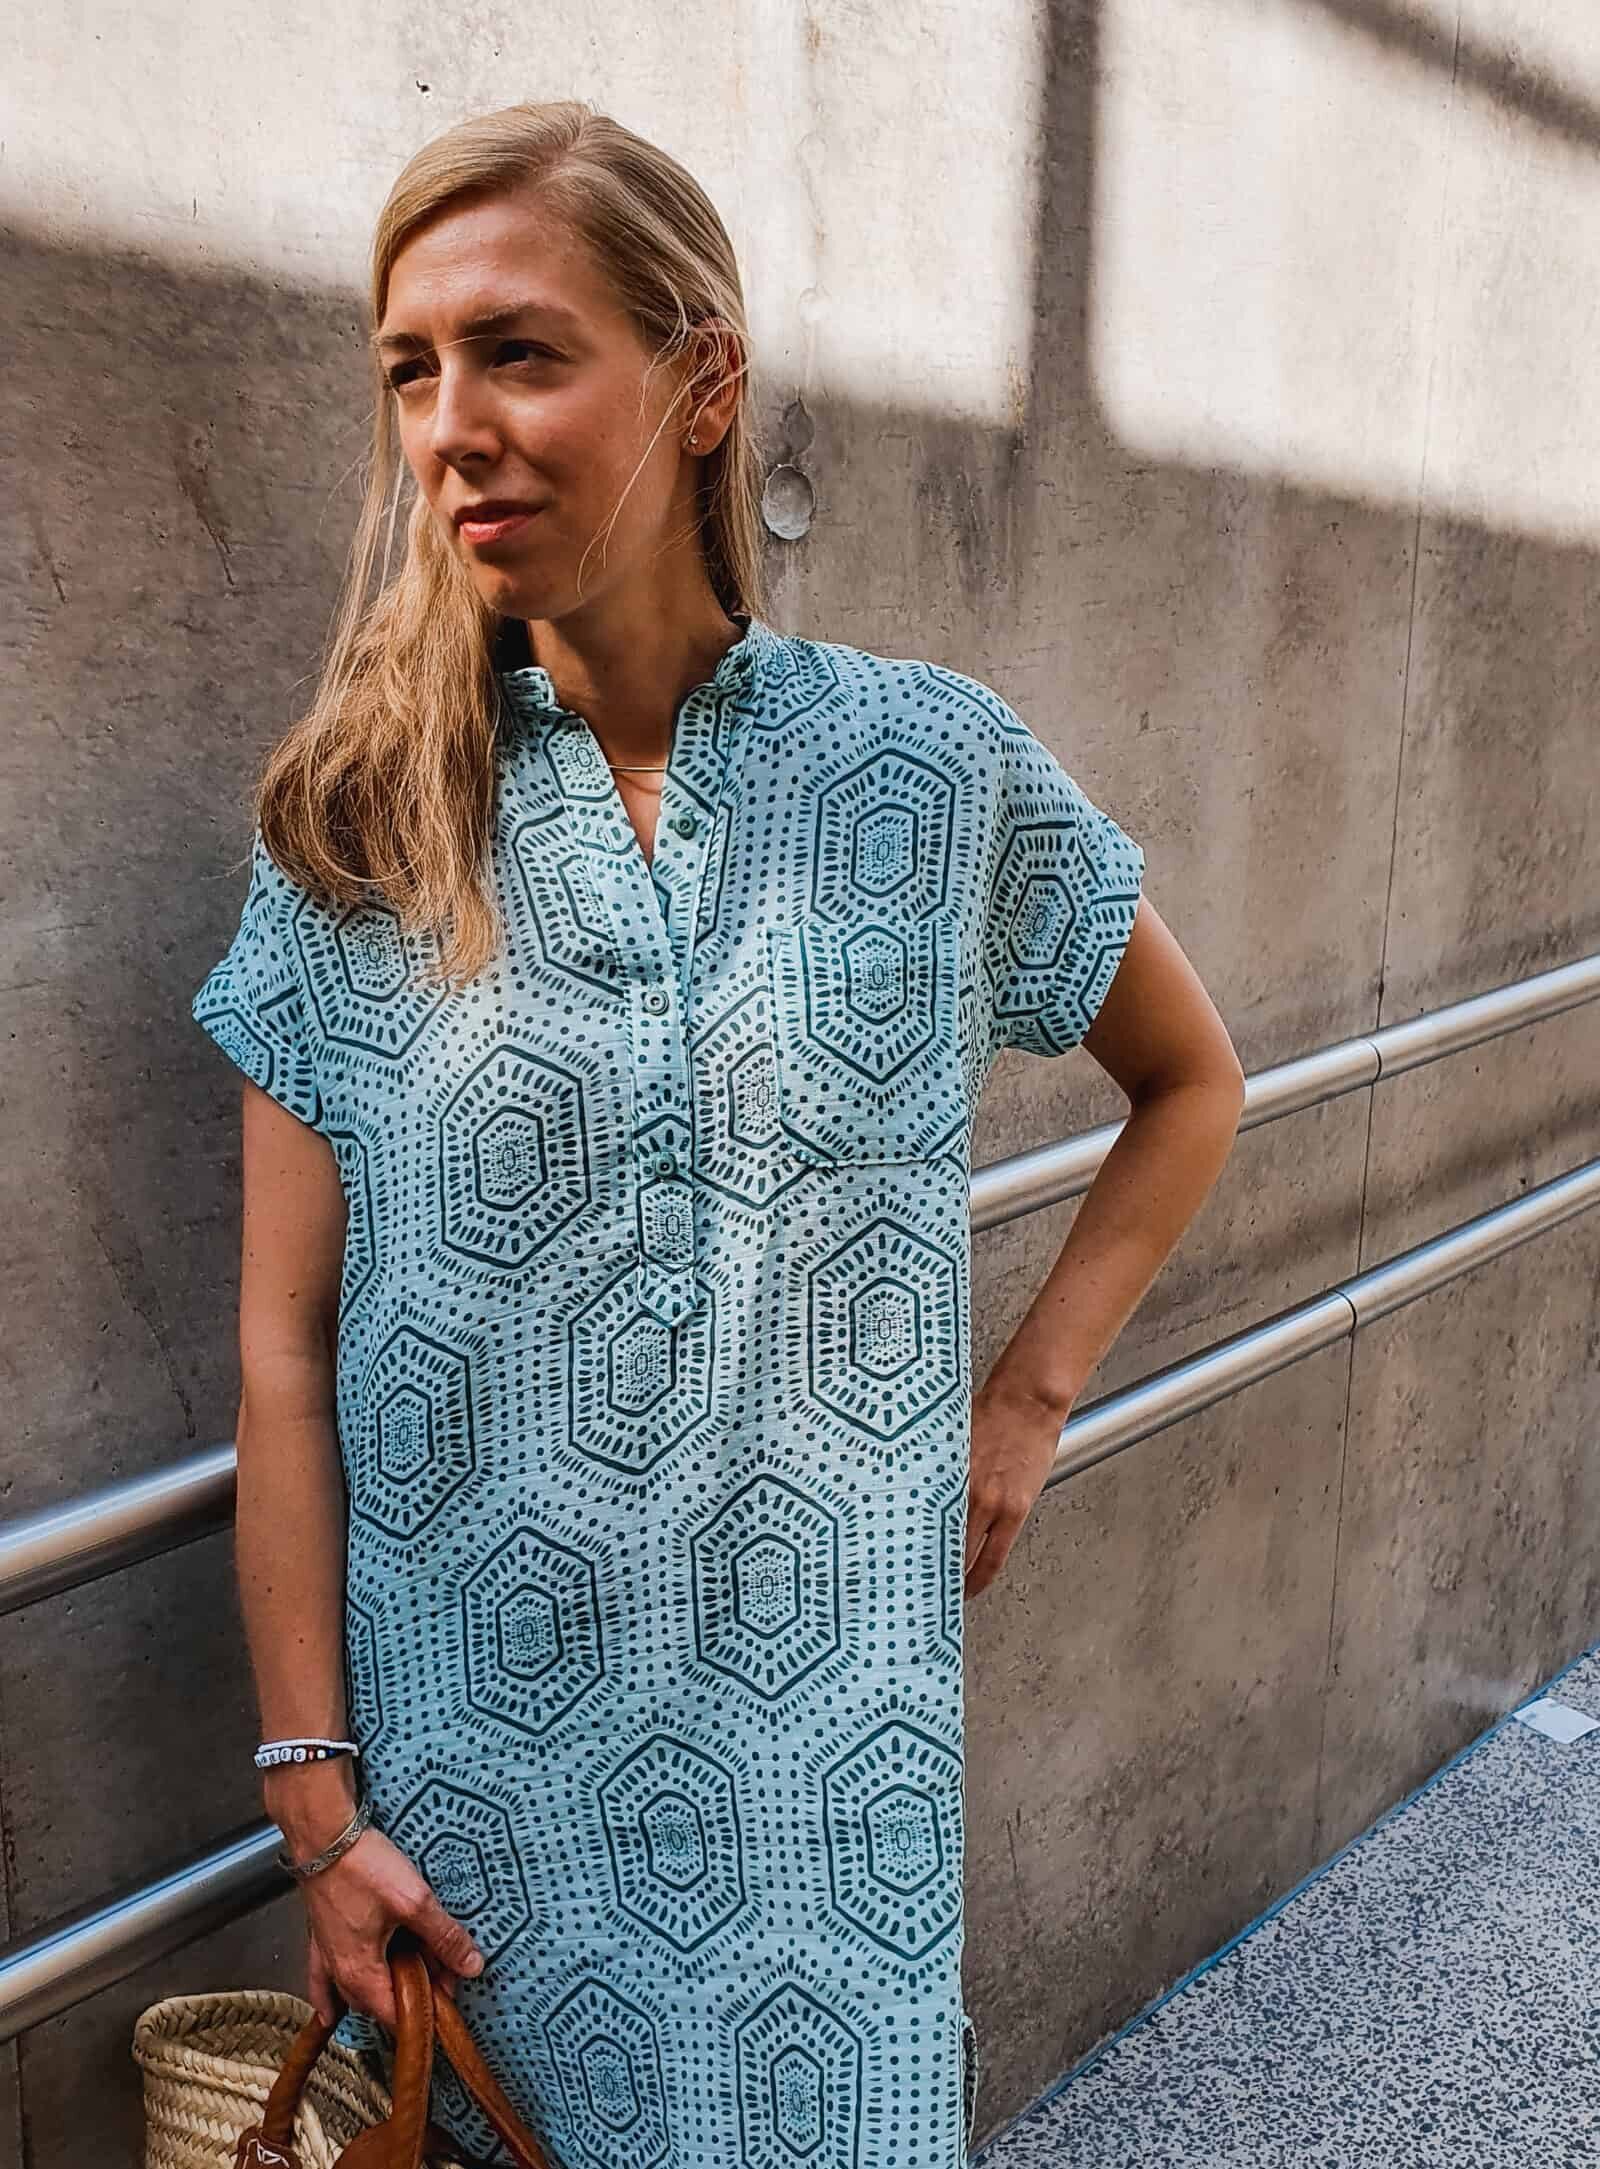 Clio Deprest in a blue gender-neutral long blouse in a beautiful boho style.  She is leaning in front of a wall.